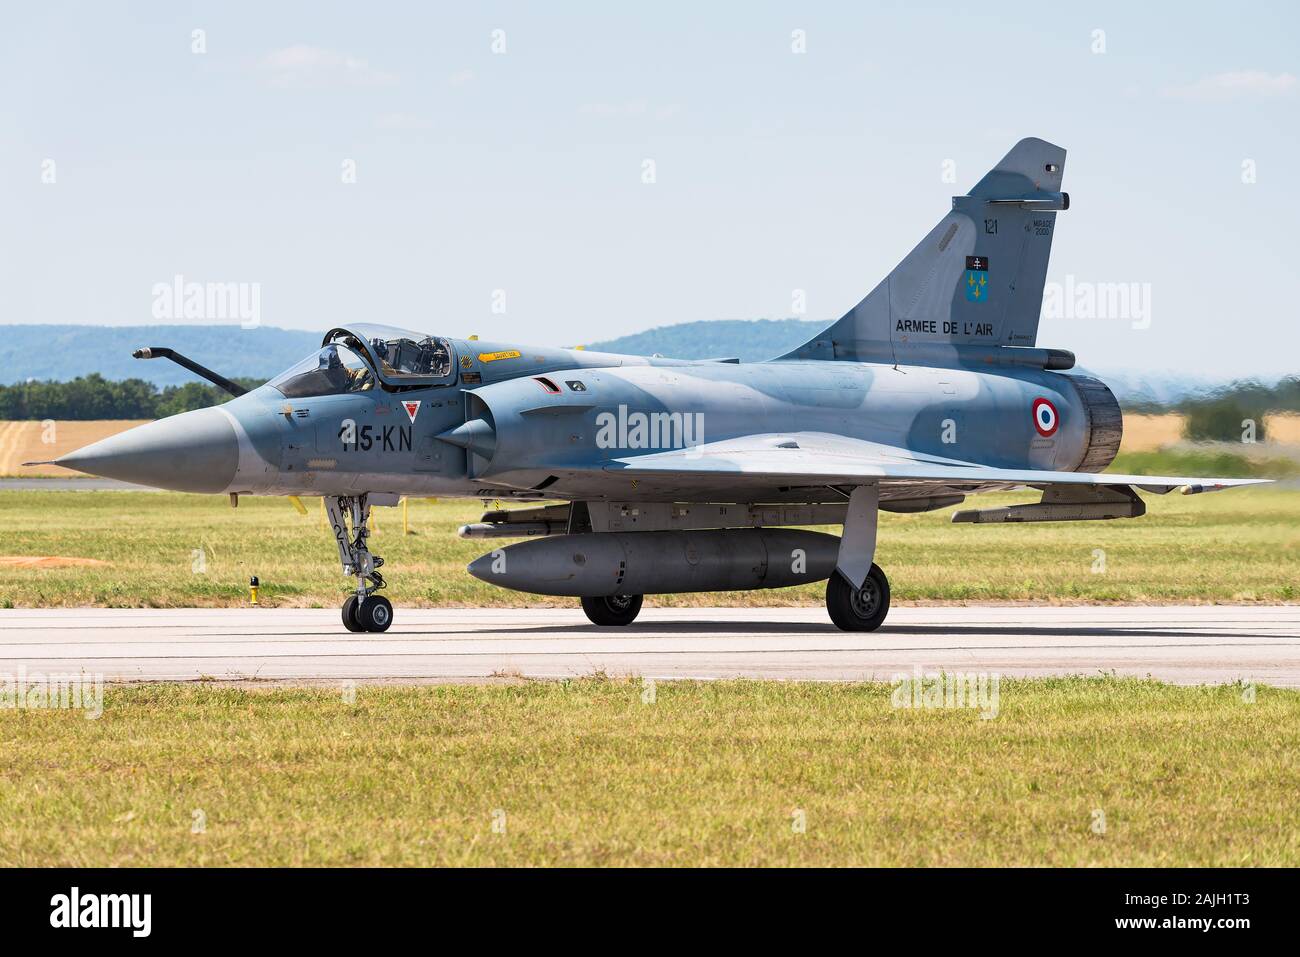 A Dassault Mirage 2000 fighter jet of the French Air Force. The Mirage 2000 is a French multirole, single-engine fourth-generation jet fighter. Stock Photo